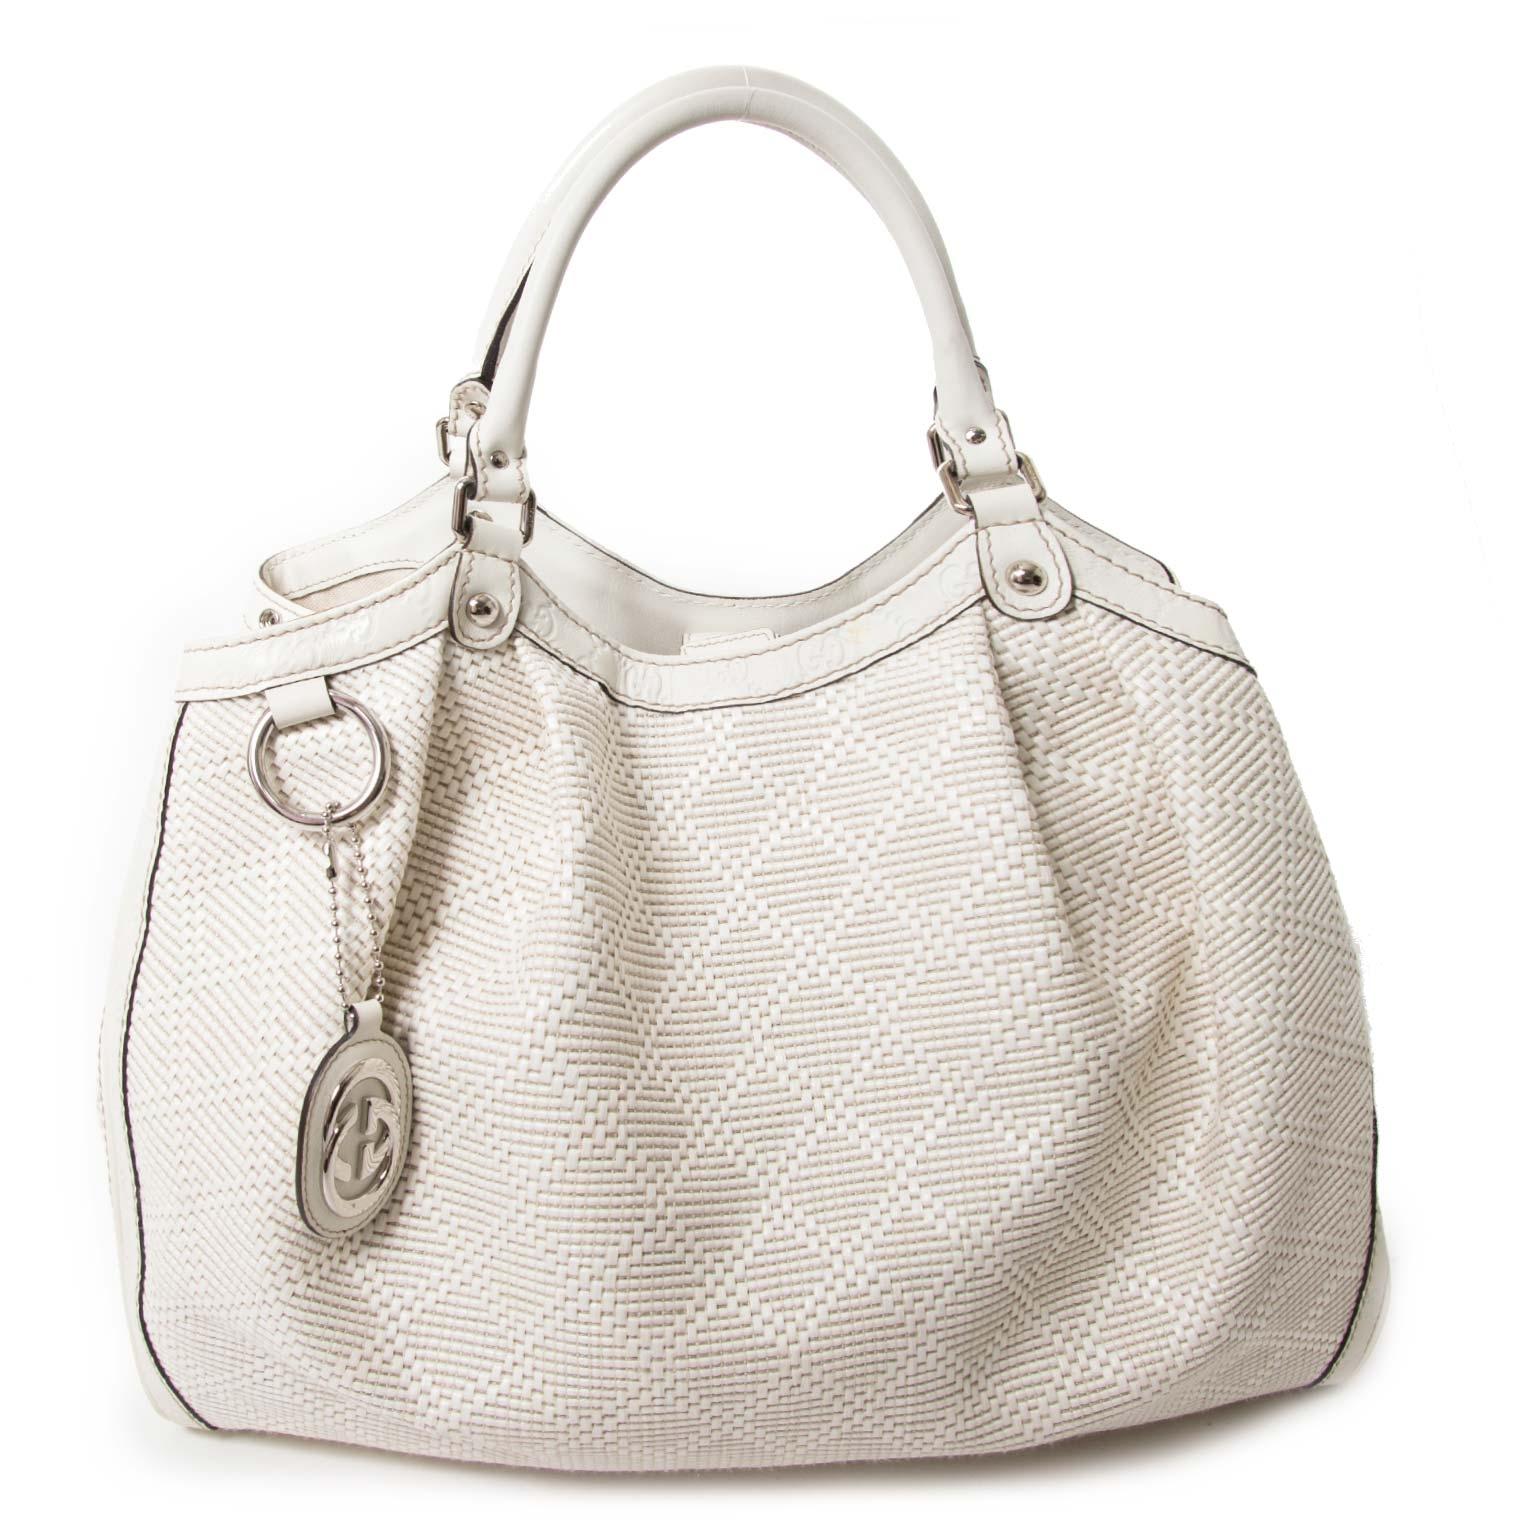 Good preloved condition

Gucci Ivory Straw 'Sukey' Bag

This timeless and elegant tote by Gucci has a refined design, but is very practical at the same time.
It is crafted from woven straw leather with leather edges, completed with GG monogram.
The